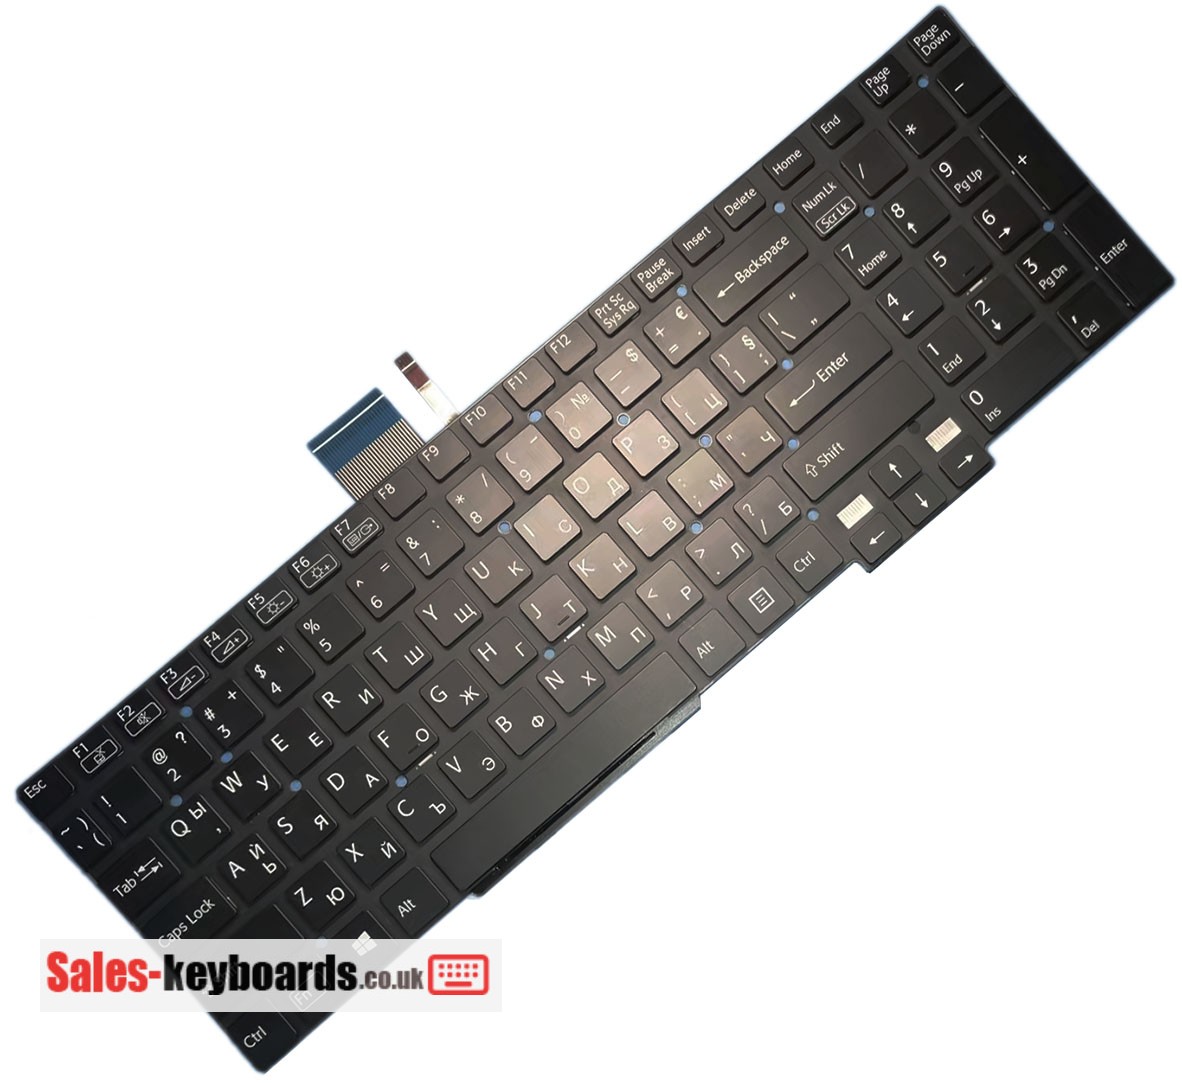 Sony VAIO SVT15115CXS Keyboard replacement